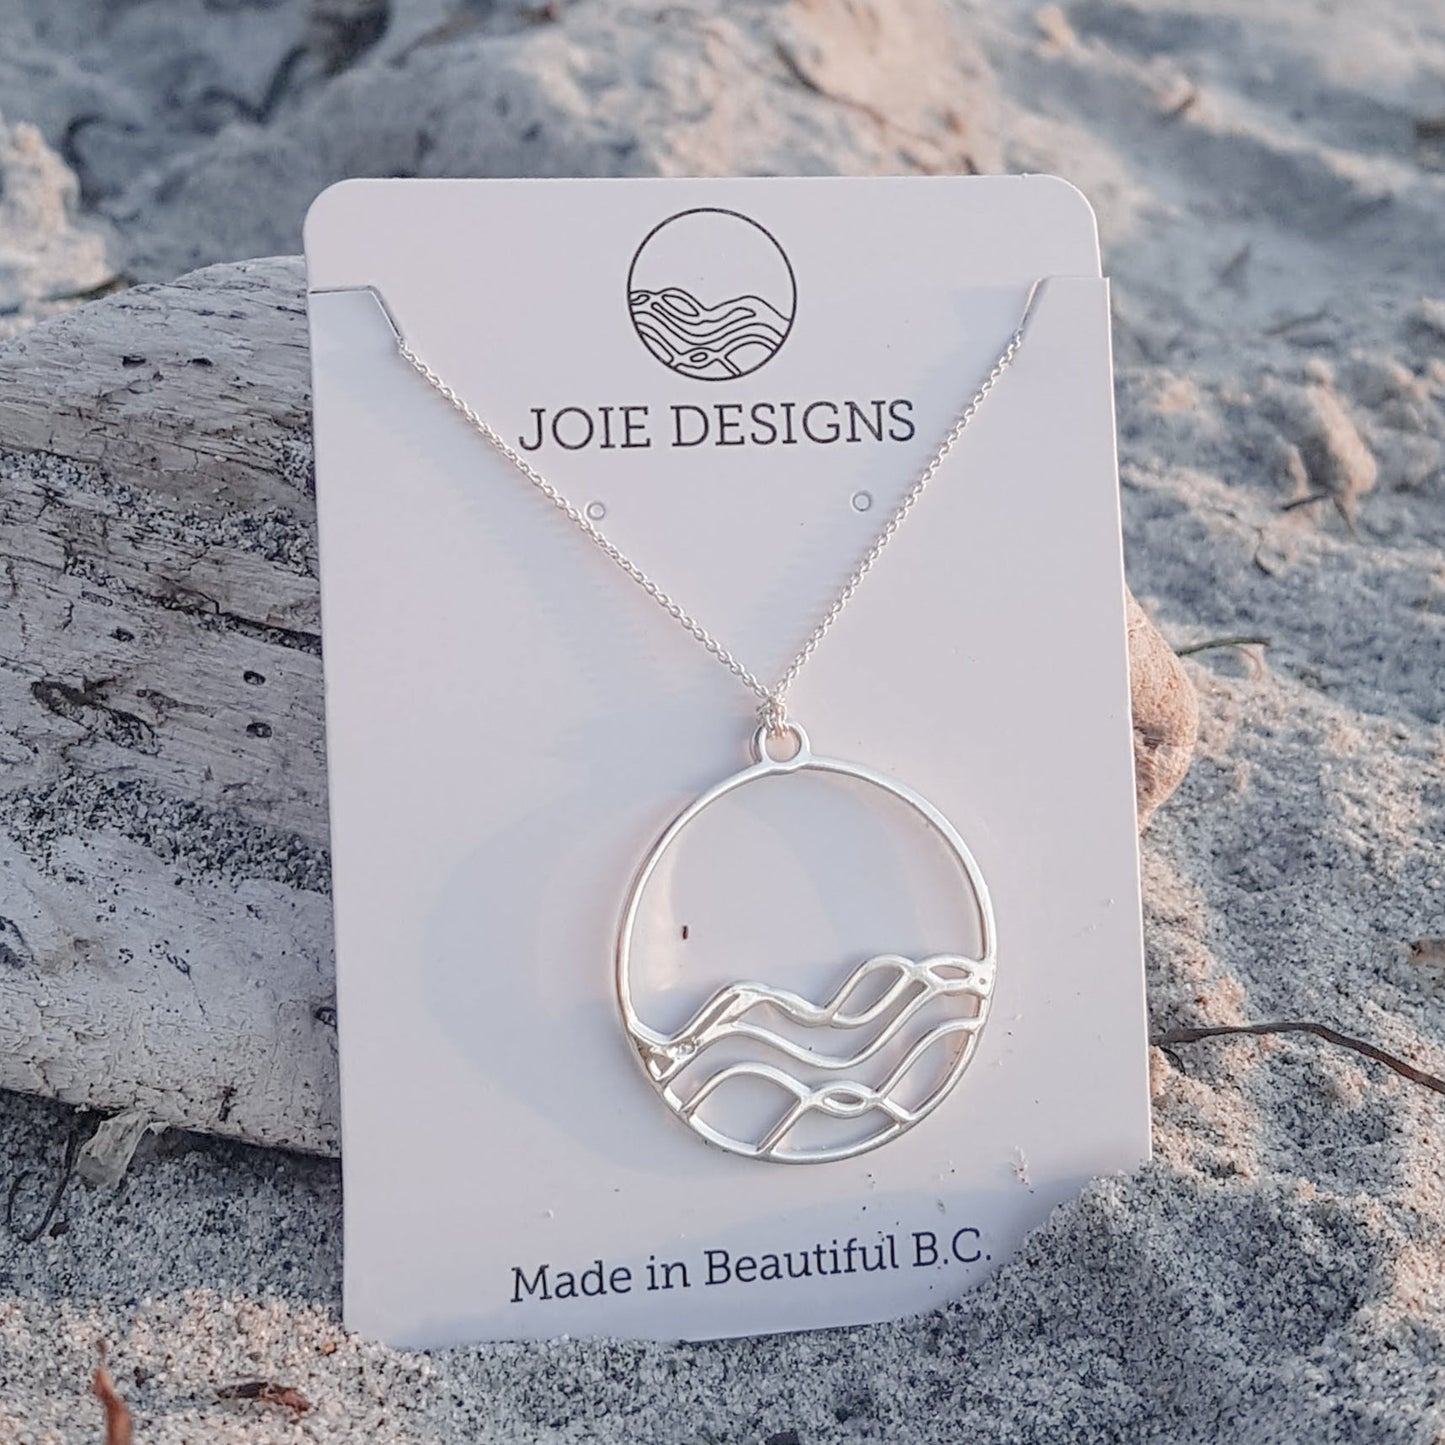 925 sterling silver high tide circle pendant necklace on white jewellery card in the sand